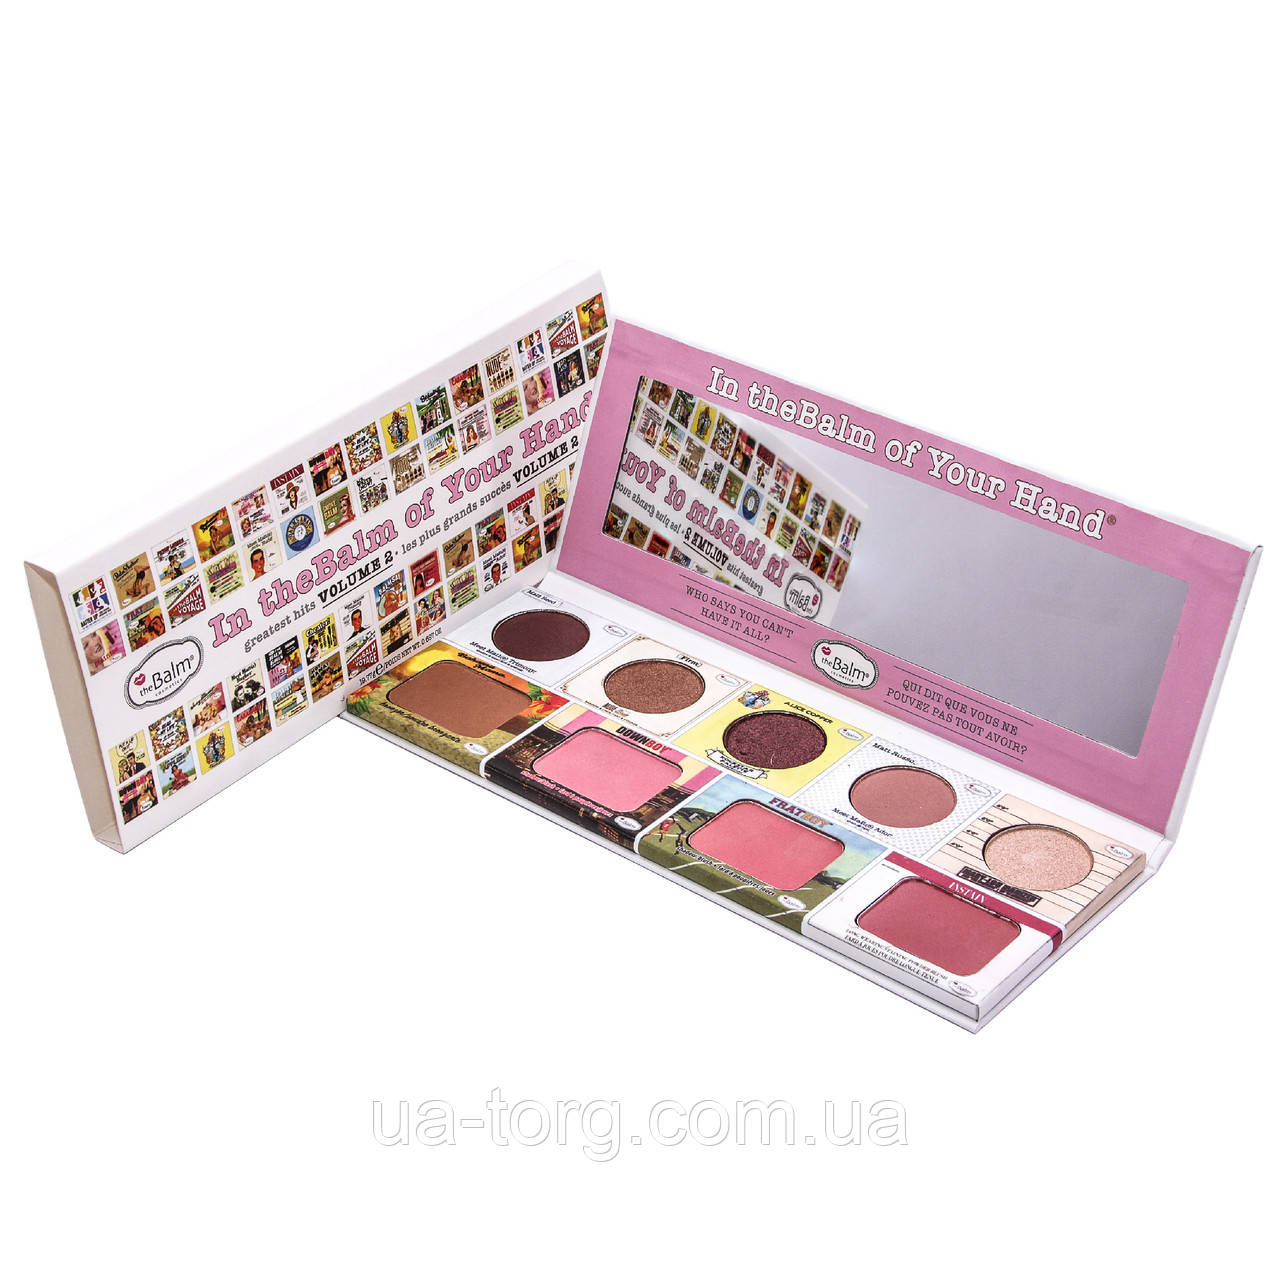 Набор для макияжа THE BALM In The Balm Of Your Hand Greatest Hits Volume 2 Palette - фото 1 - id-p1548905808